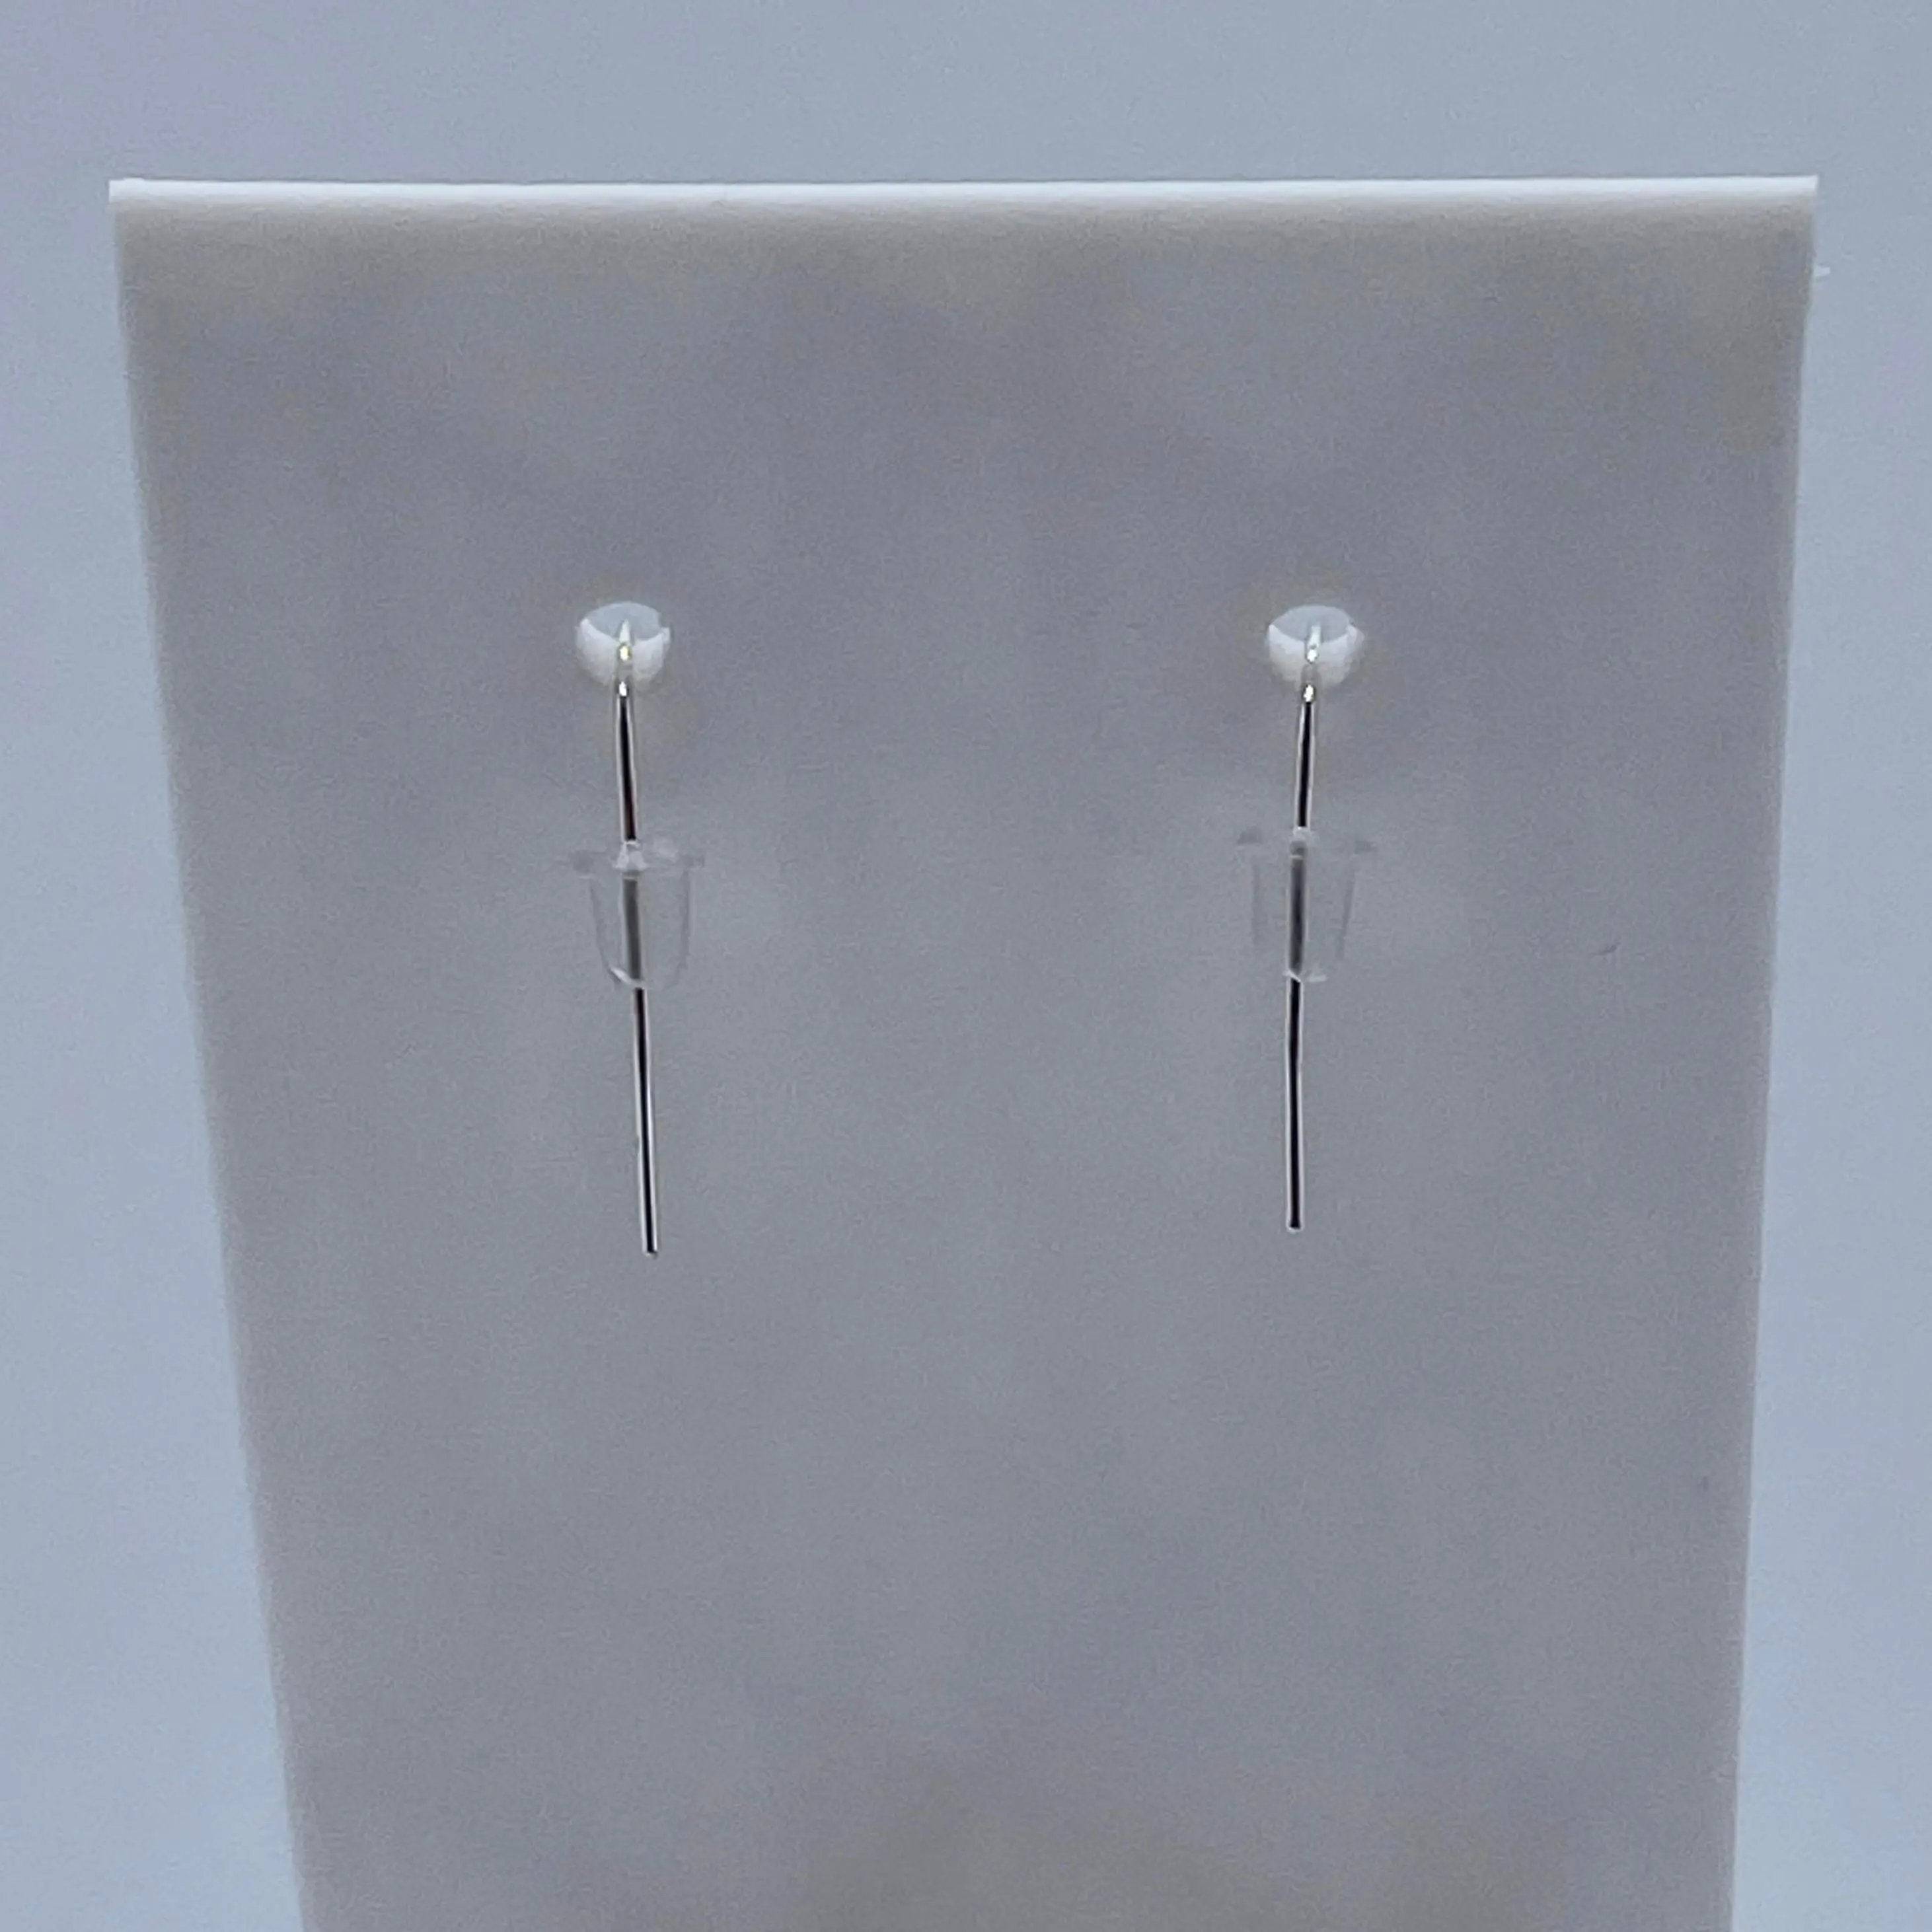 Double Helix DNA Dangle Earrings are made with sterling silver hooks and silicone backs.